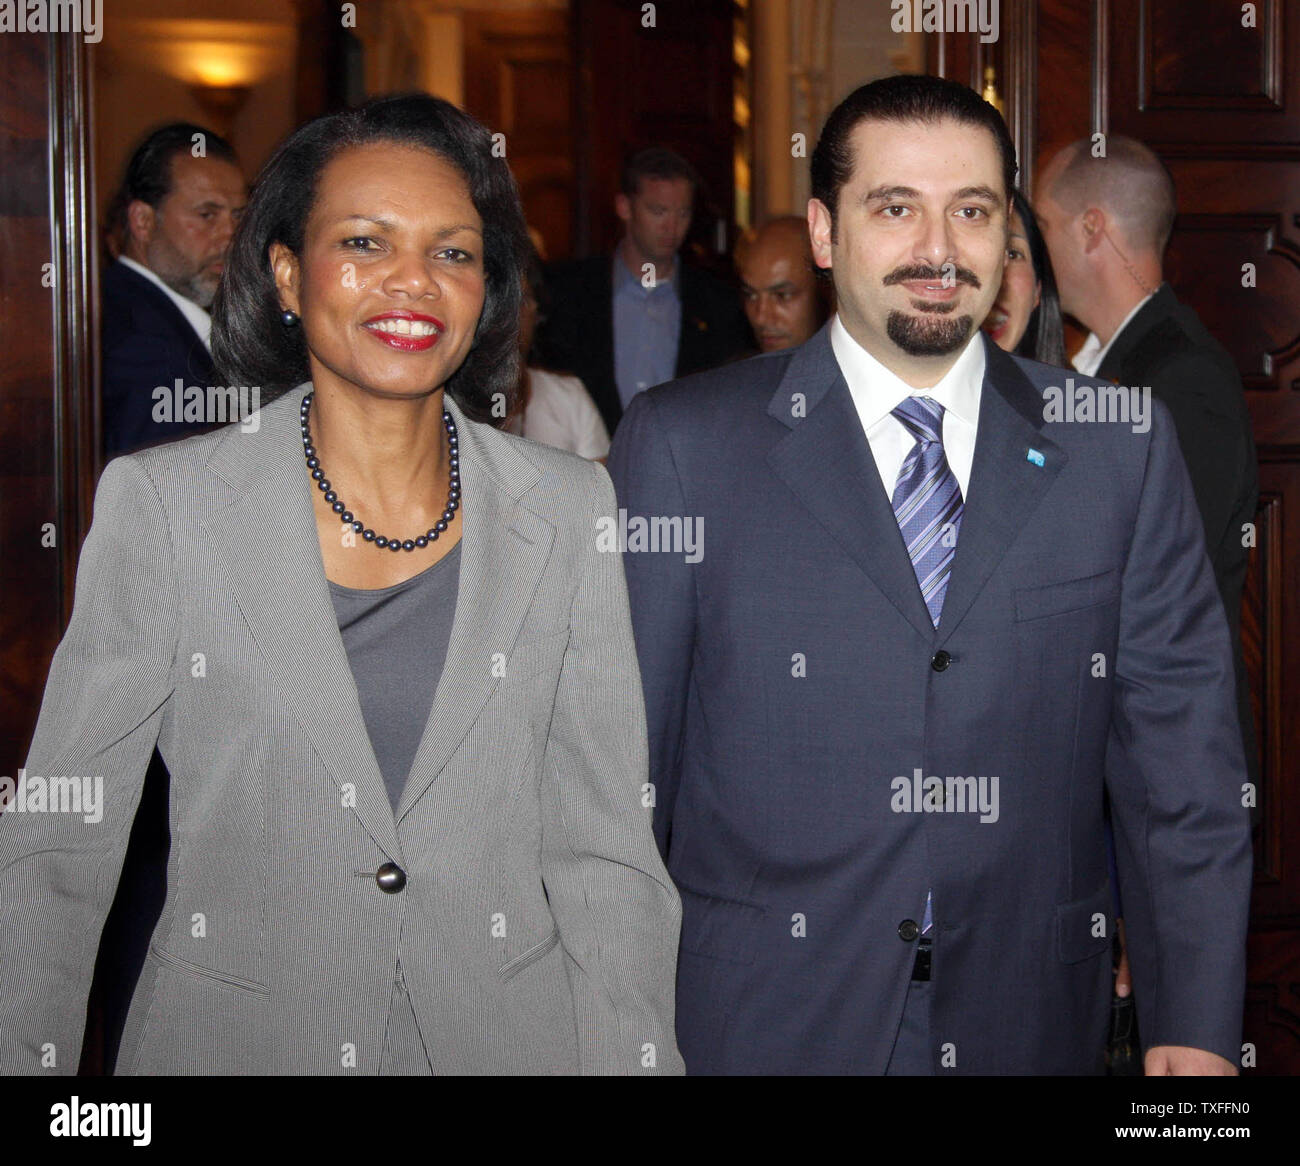 U.S. Secretary of State Condoleezza Rice (L) is greeted by head of the pro-government Future Movement Saad Hariri in Beirut on June 16, 2008. Rice made an unannounced visit to Lebanon to show support for Lebanon’s democratic institutions following last months power-sharing deal that ended an 18 month political stand off between the Lebanese government and the Hezbollah backed opposition. (UPI Photo/Dalati & Nohra) Stock Photo